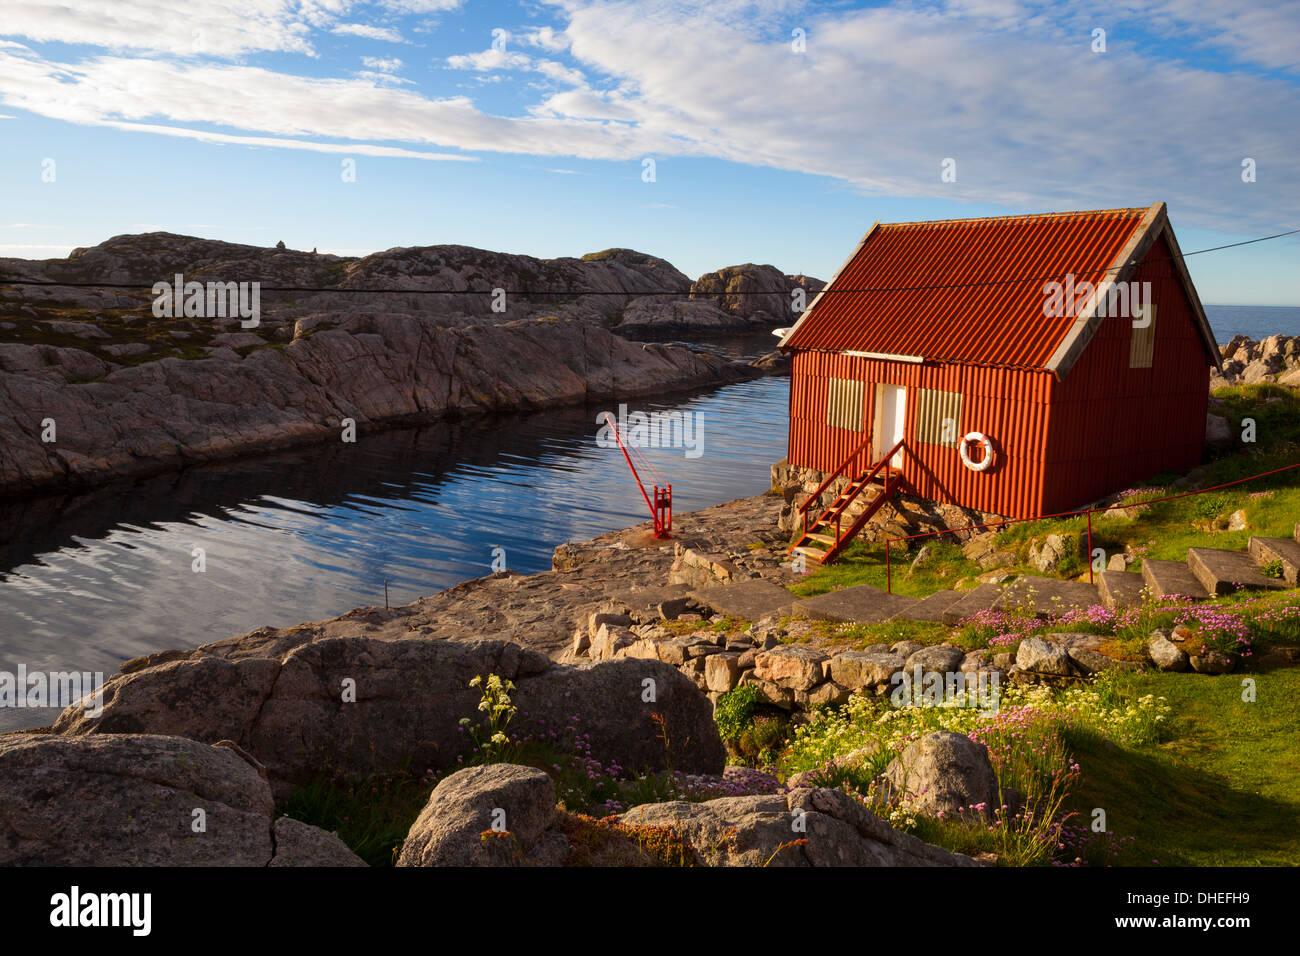 Wharf and shed, Lindesnes Fyr Lighthouse, Lindesnes, Vest-Agder, Norway, Scandinavia, Europe Stock Photo